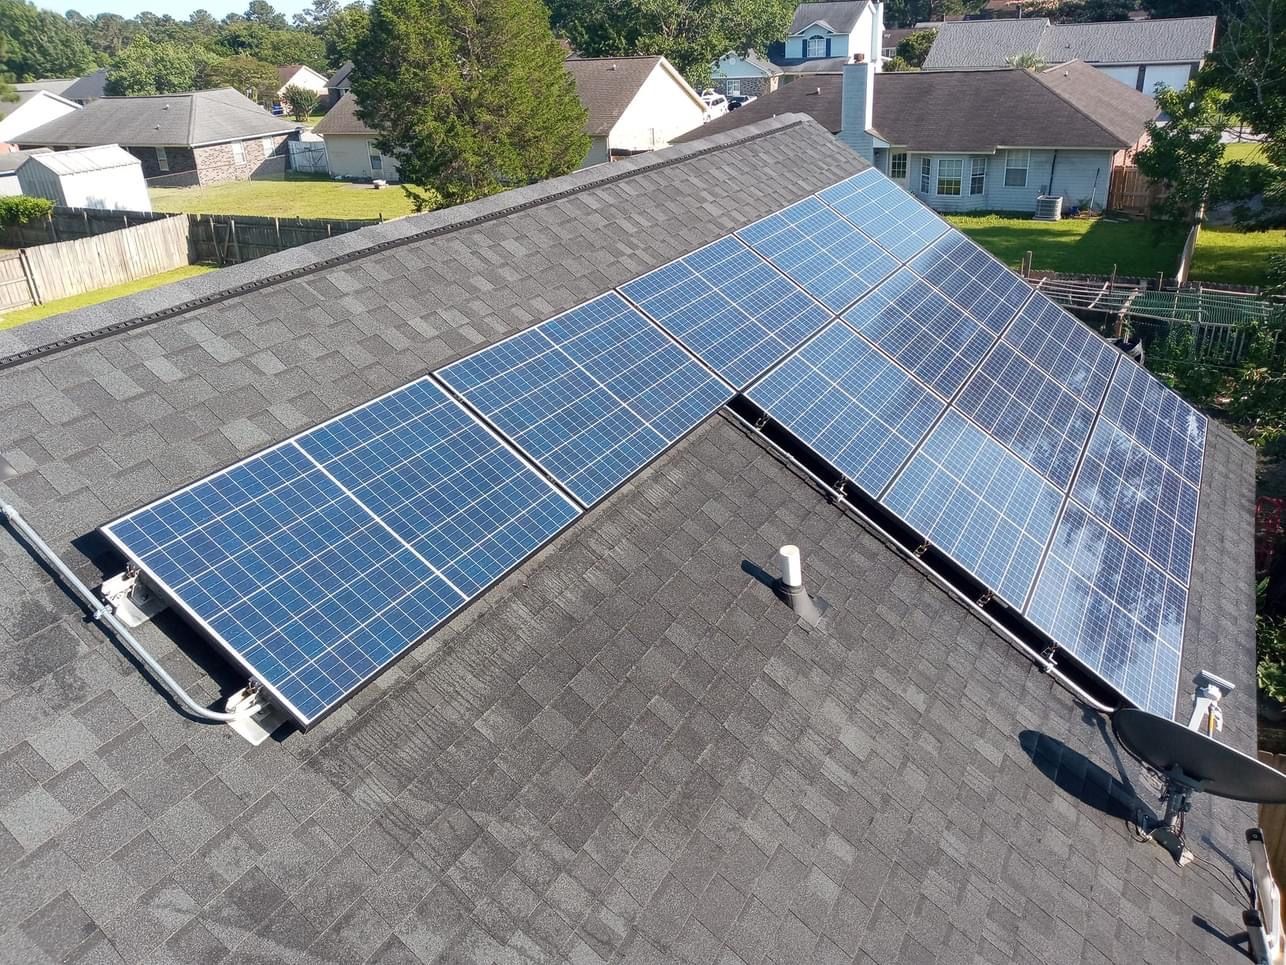 Solar panels in Anaheim Hills, Orange County, radiate brilliantly following our specialized cleaning service.